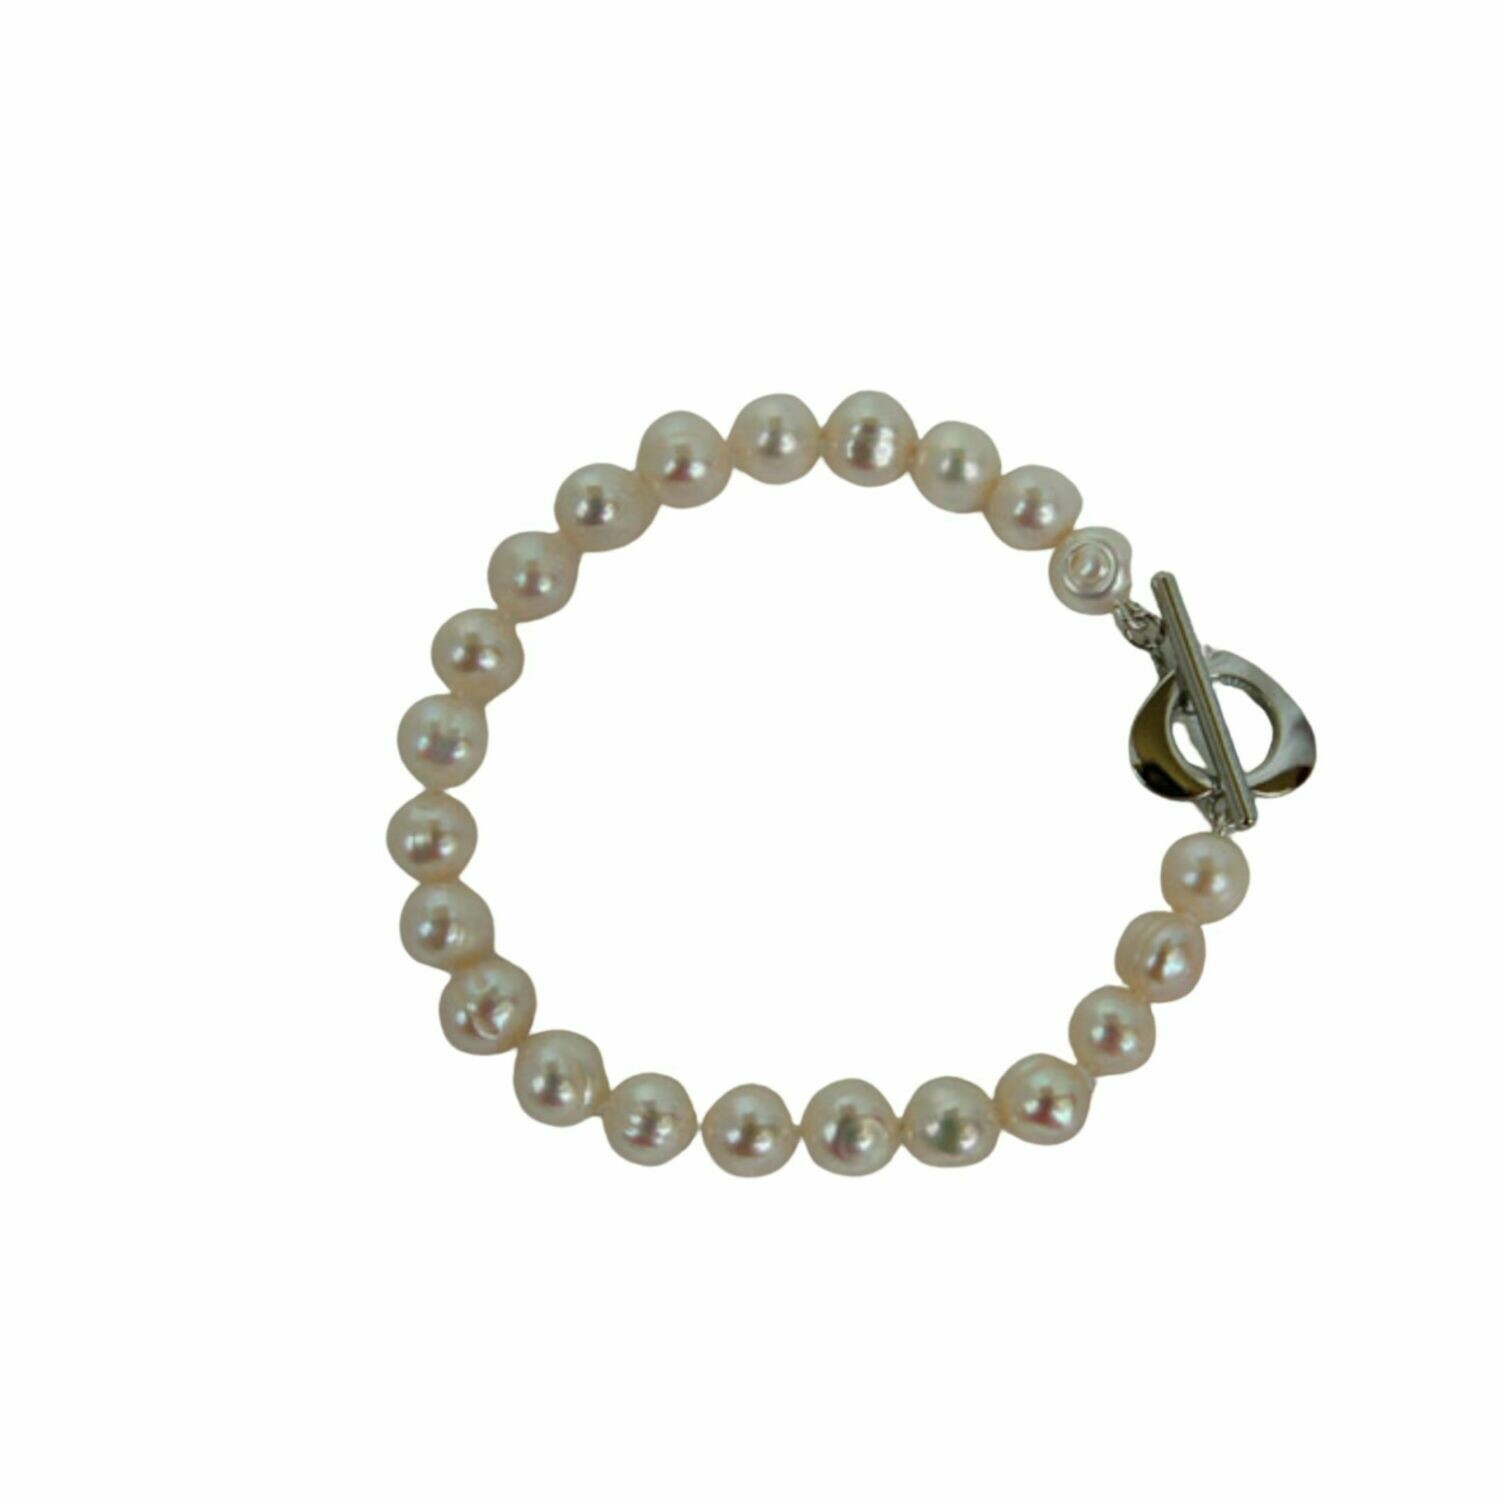 11mm freshwater cultured pearl bracelet with heart clasp.